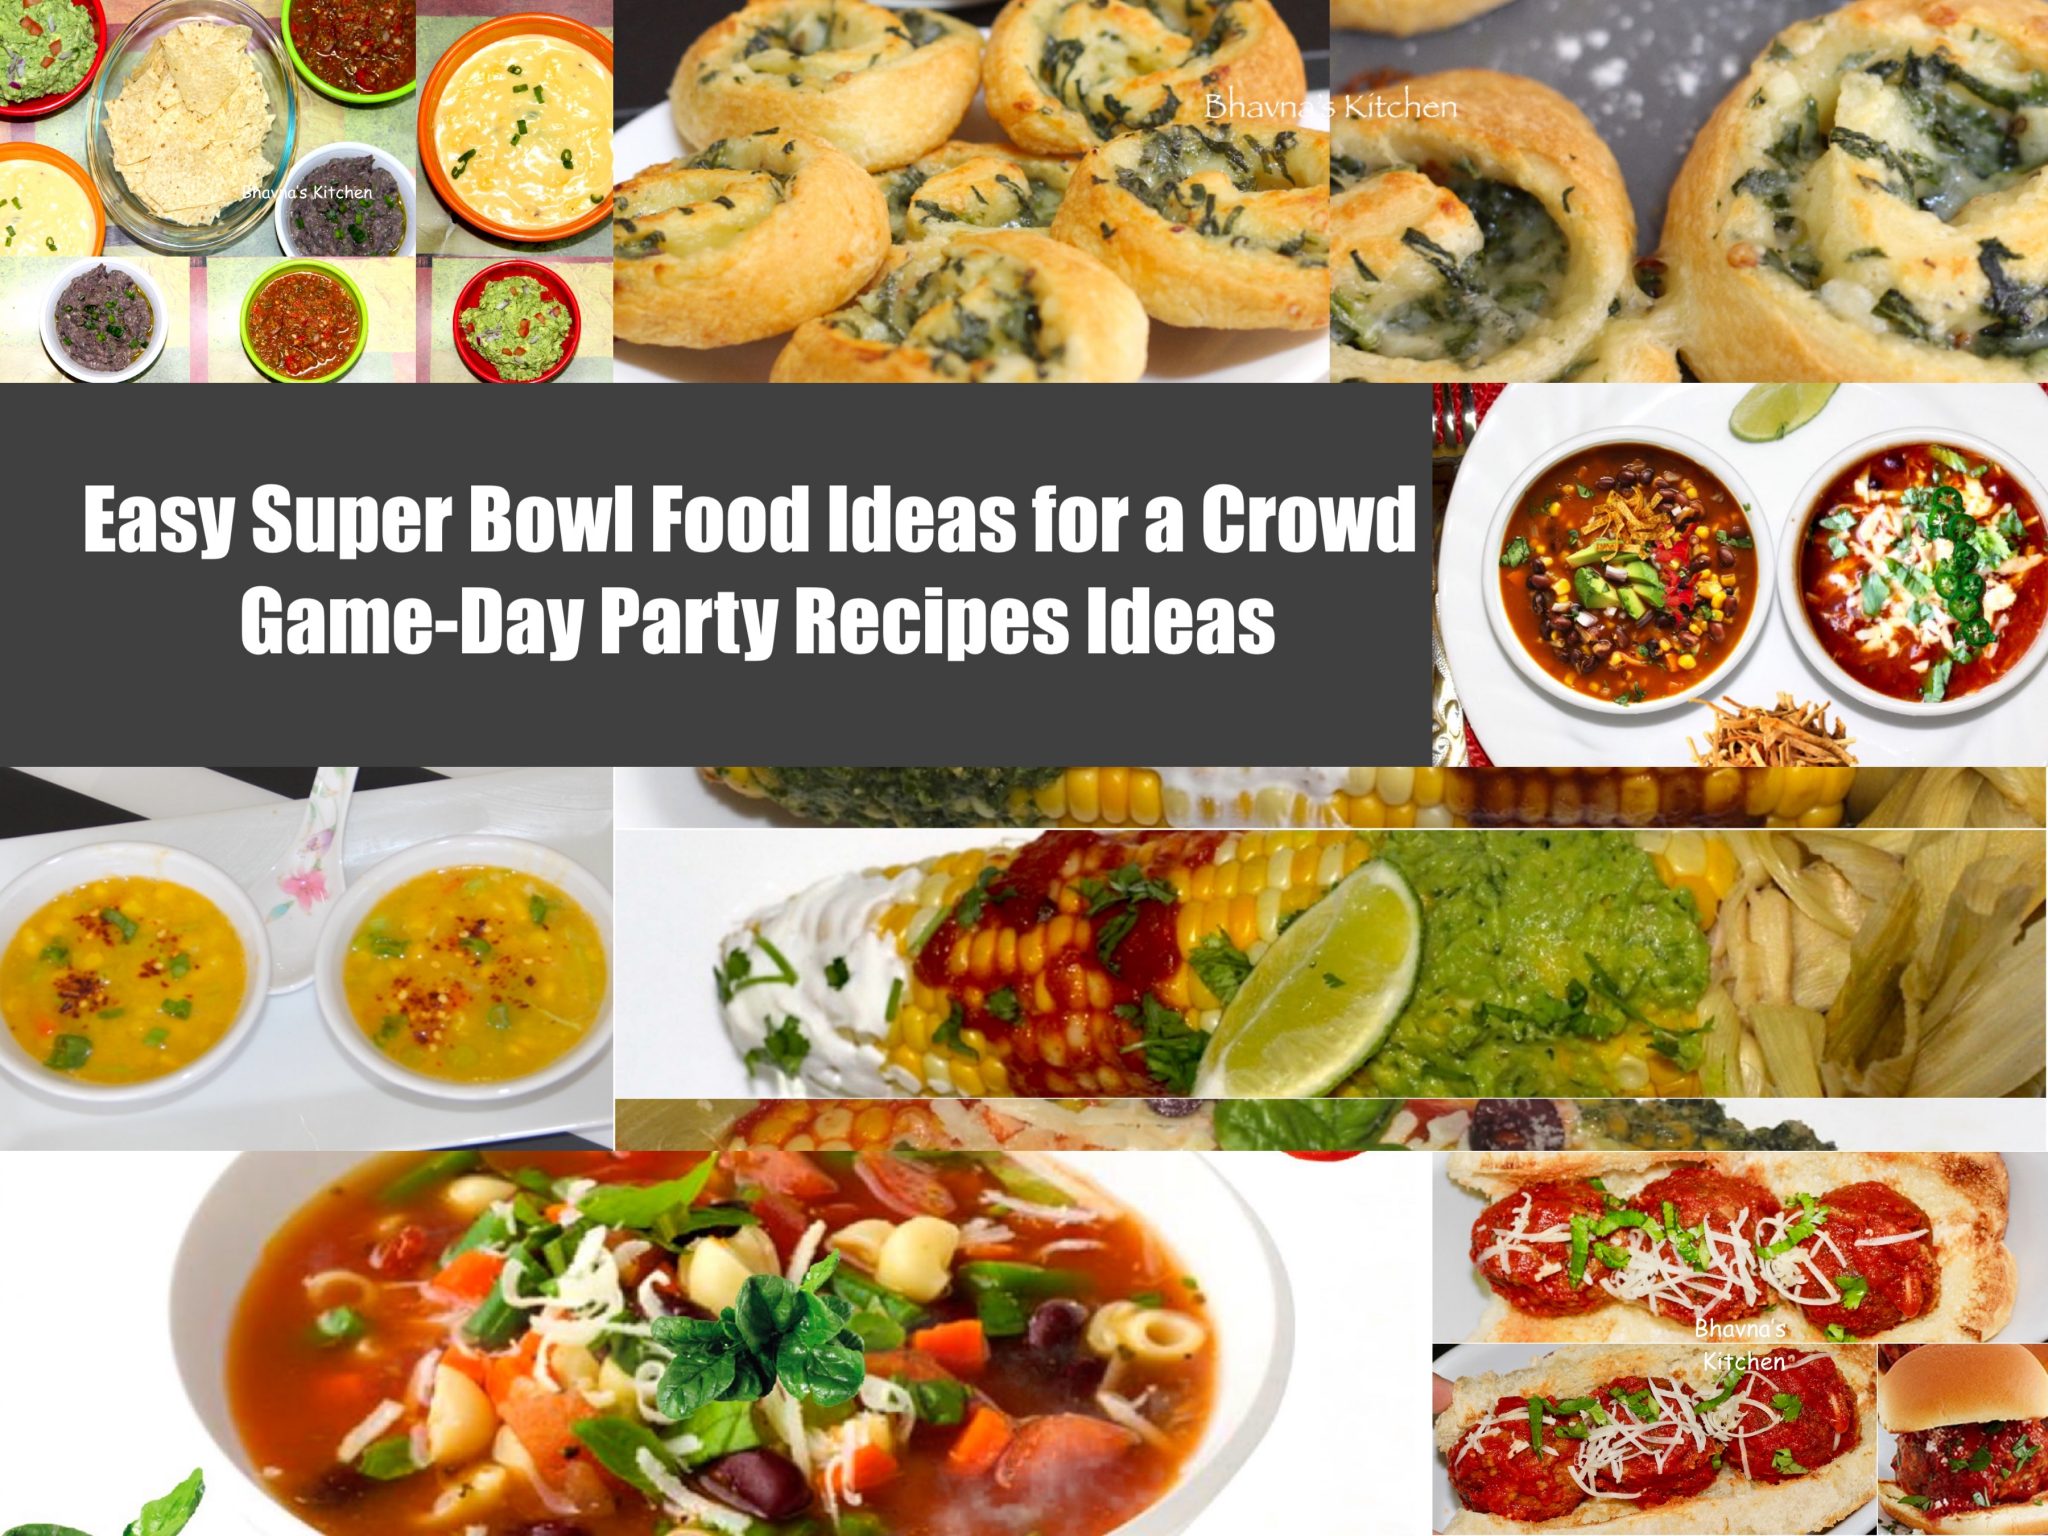 Easy Super Bowl Food Ideas for a Crowd – Game-Day Party Recipes Ideas